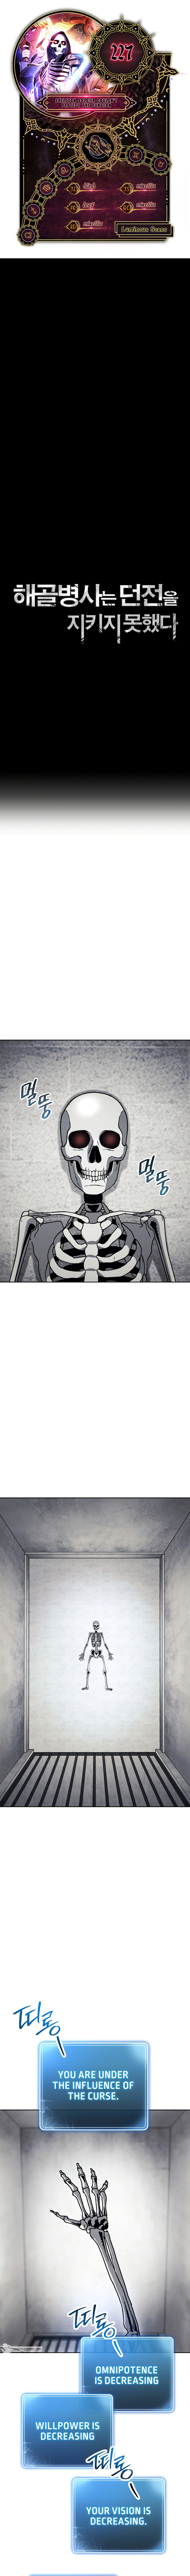 Skeleton Soldier Couldn't Protect the Dungeon - Chapter 25955 - Image 1